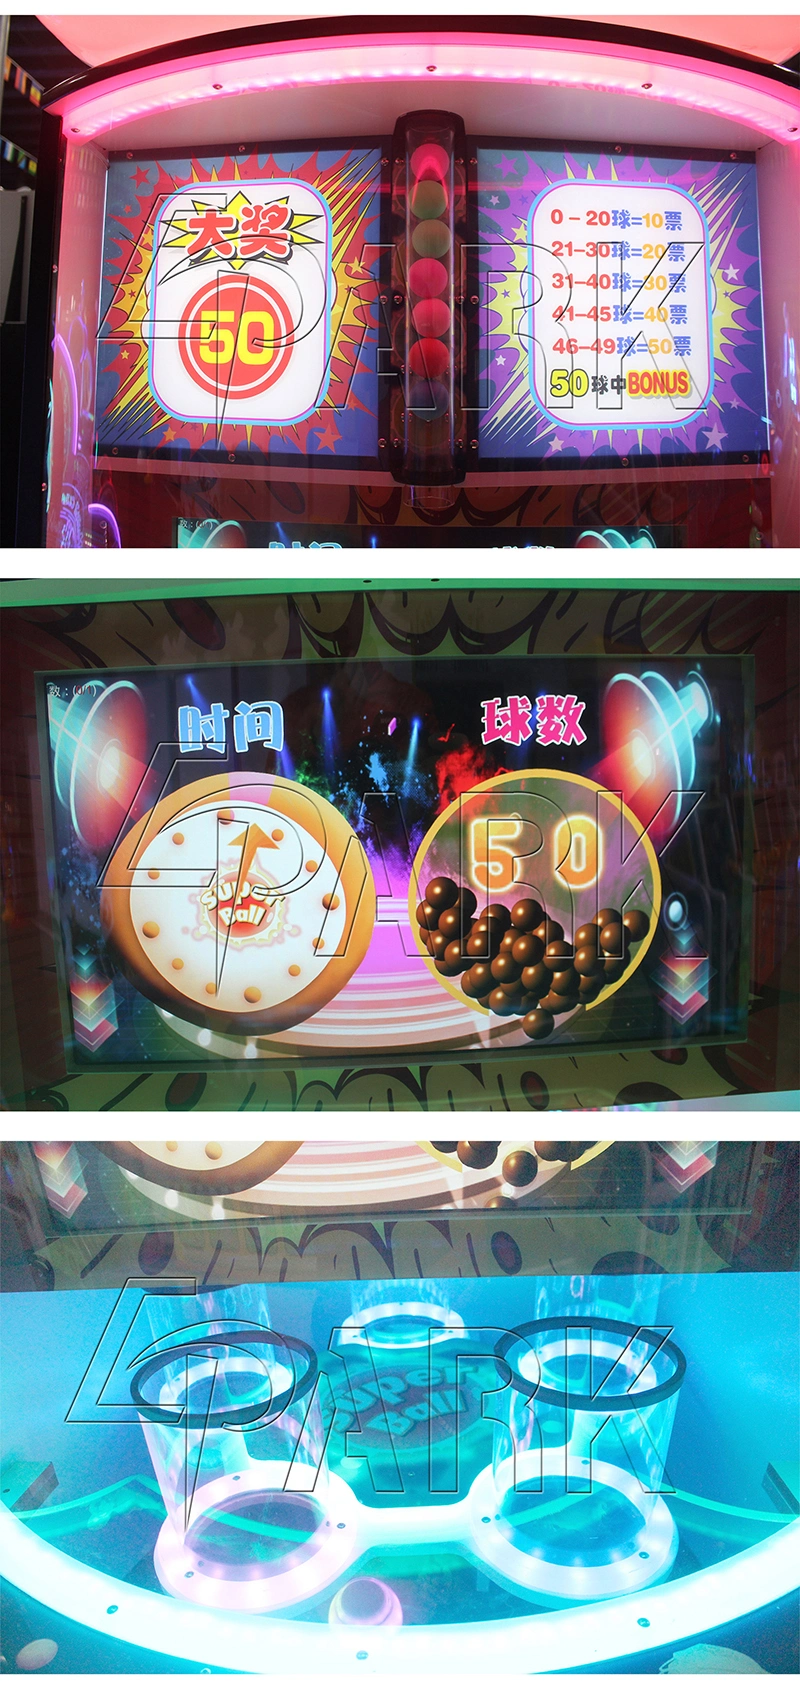 Shopping Center Quick Profit Lottery Arcade Games Supreme Boost Drop Ball with Score System